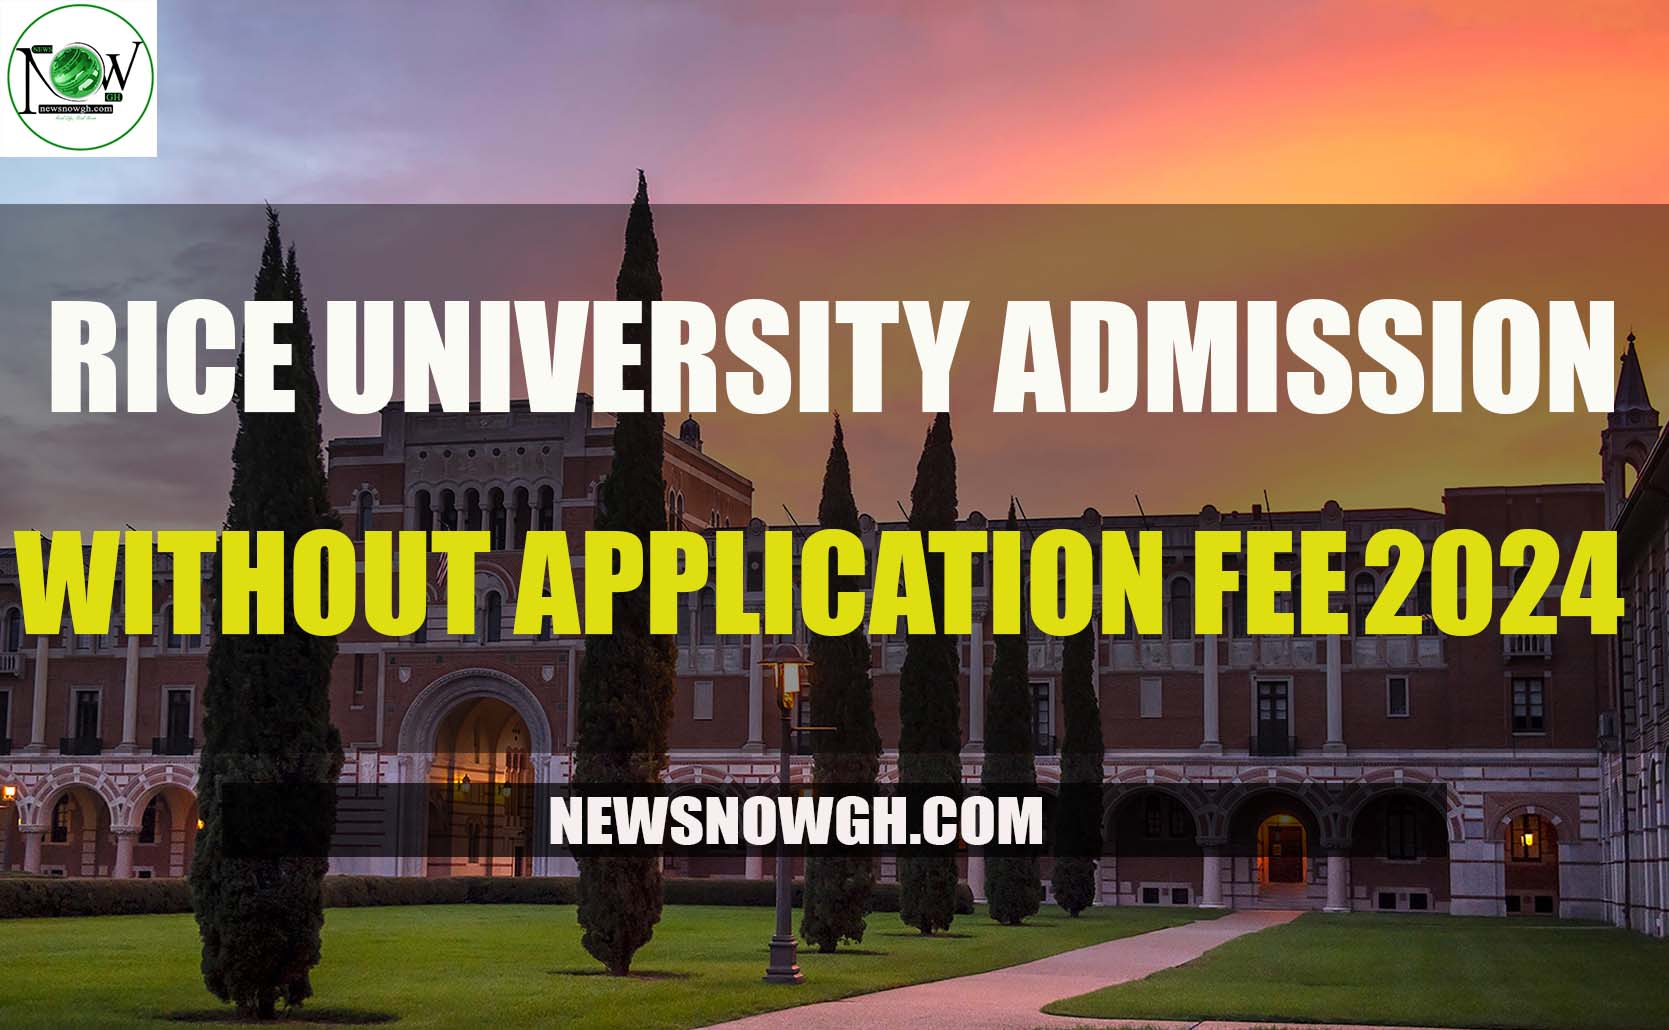 Rice University admissions without application fee for 202425